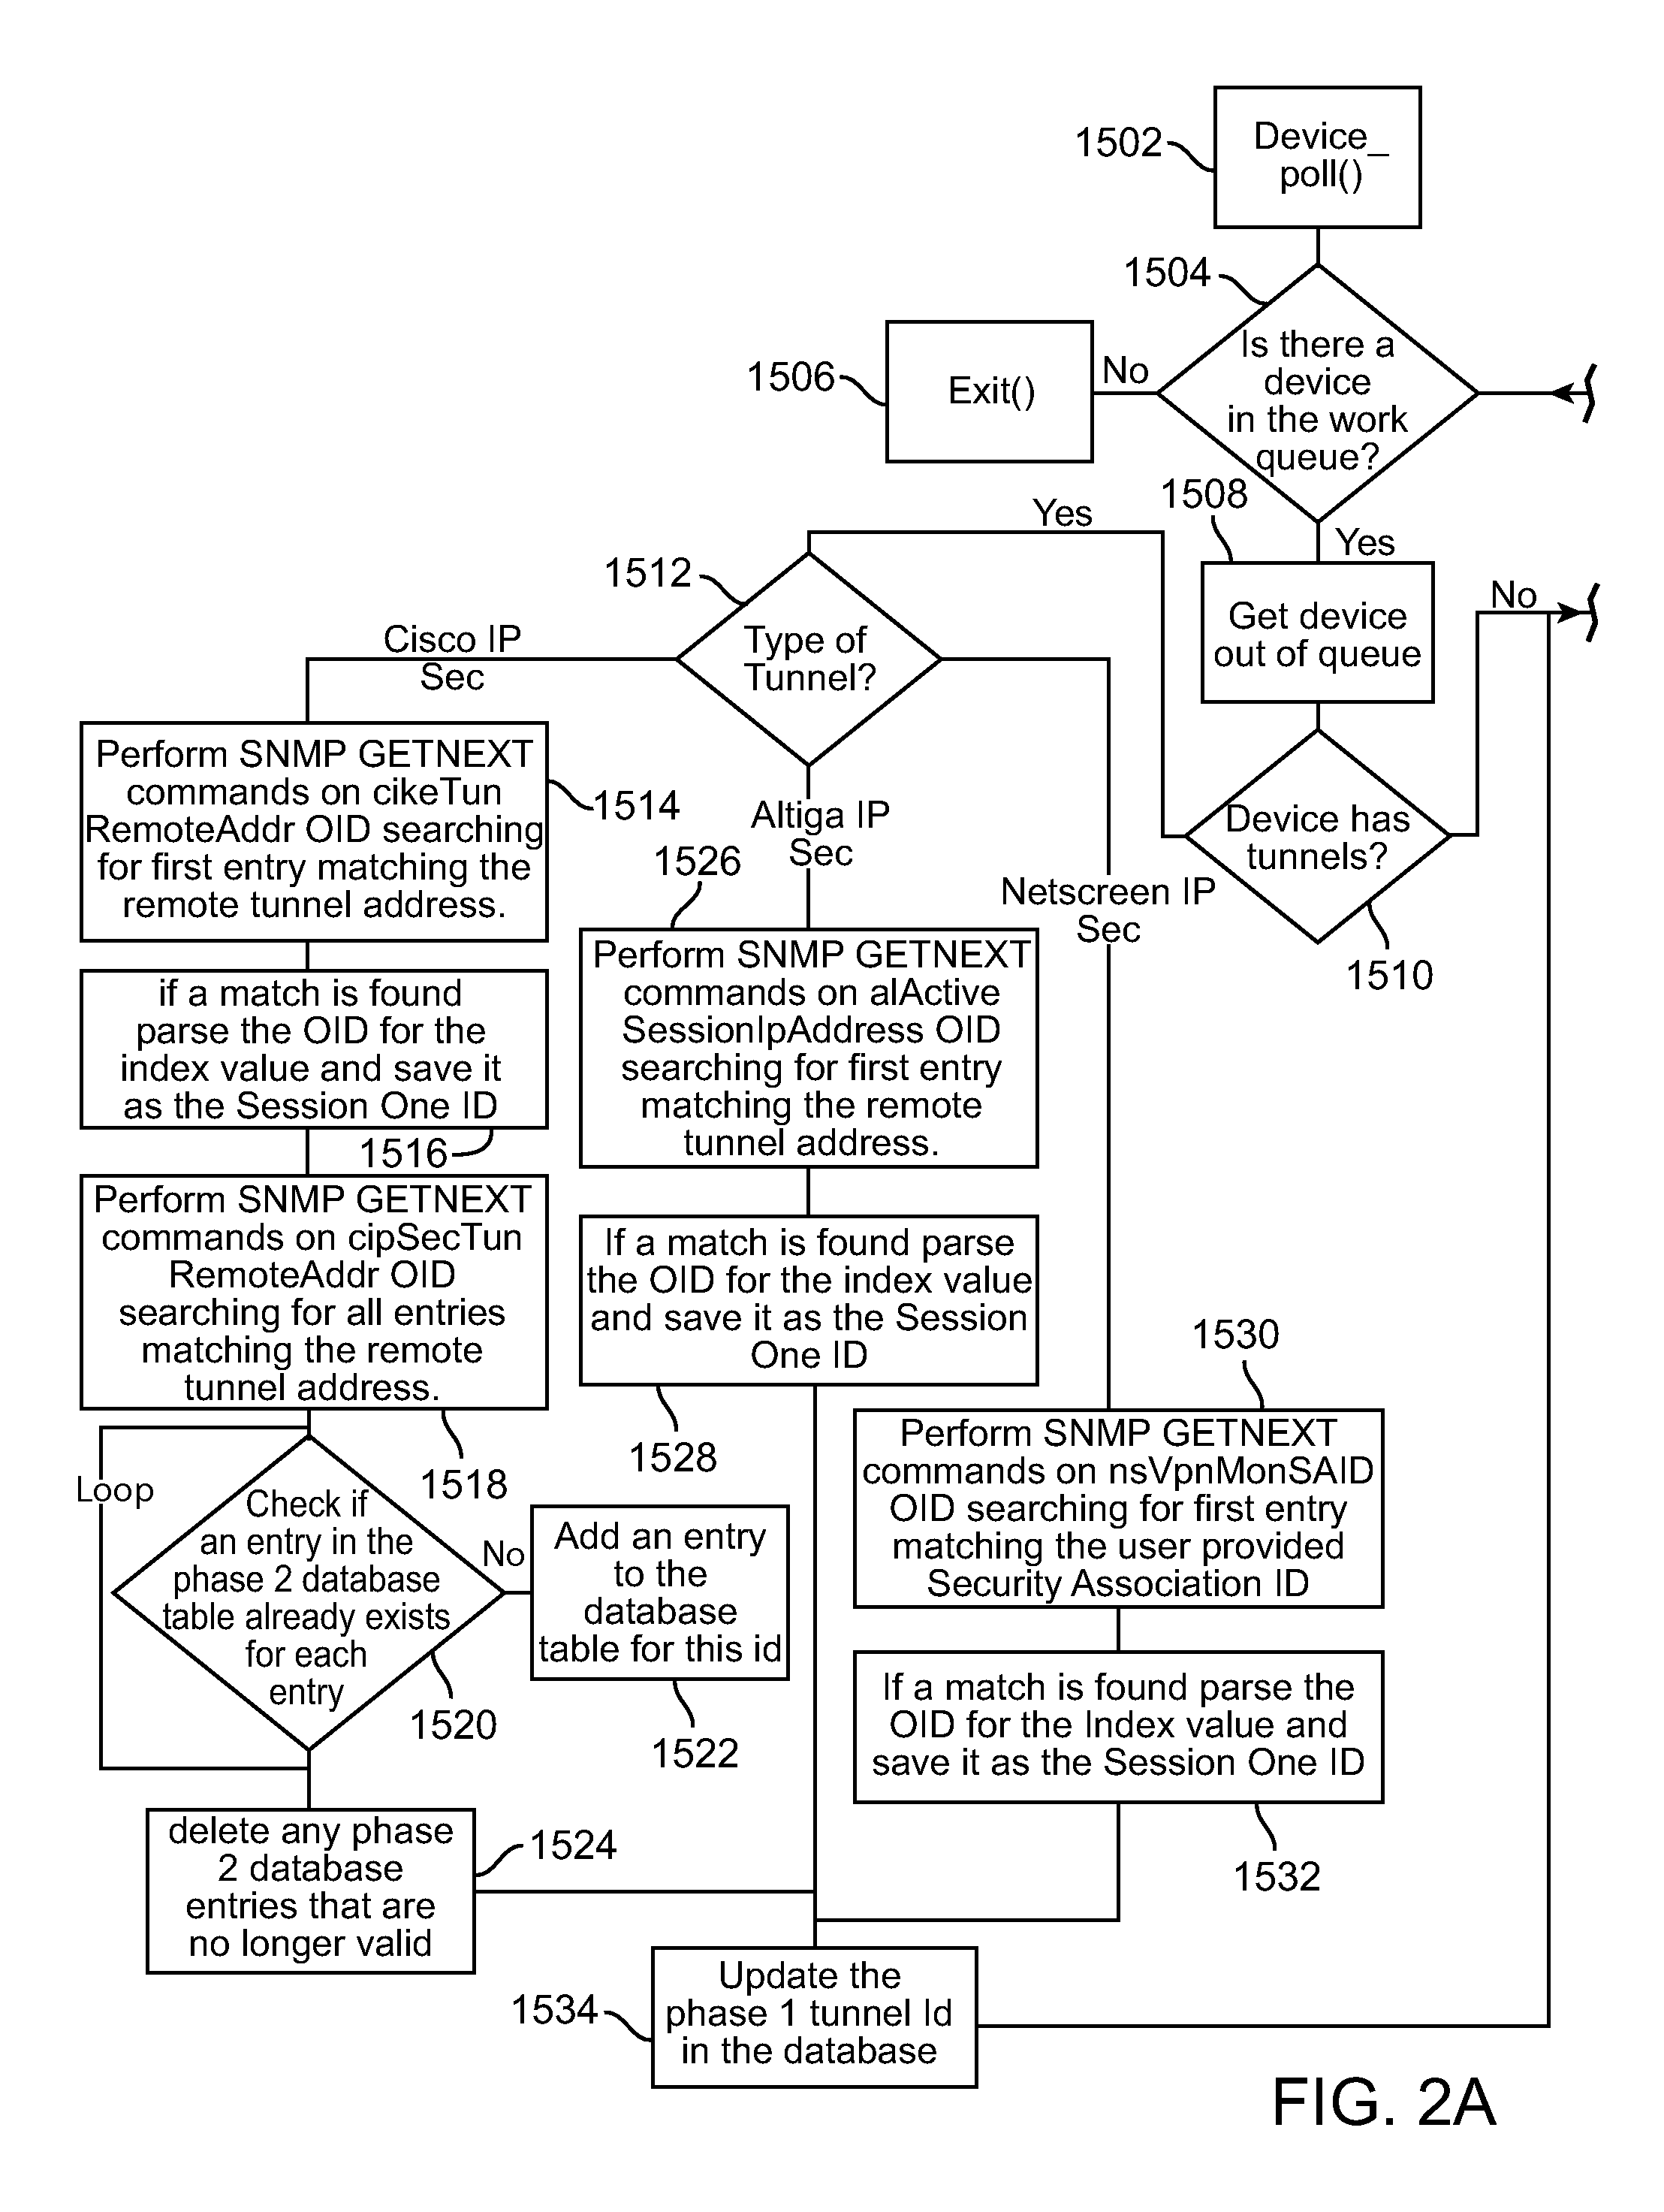 System and interface for monitoring information technology assets